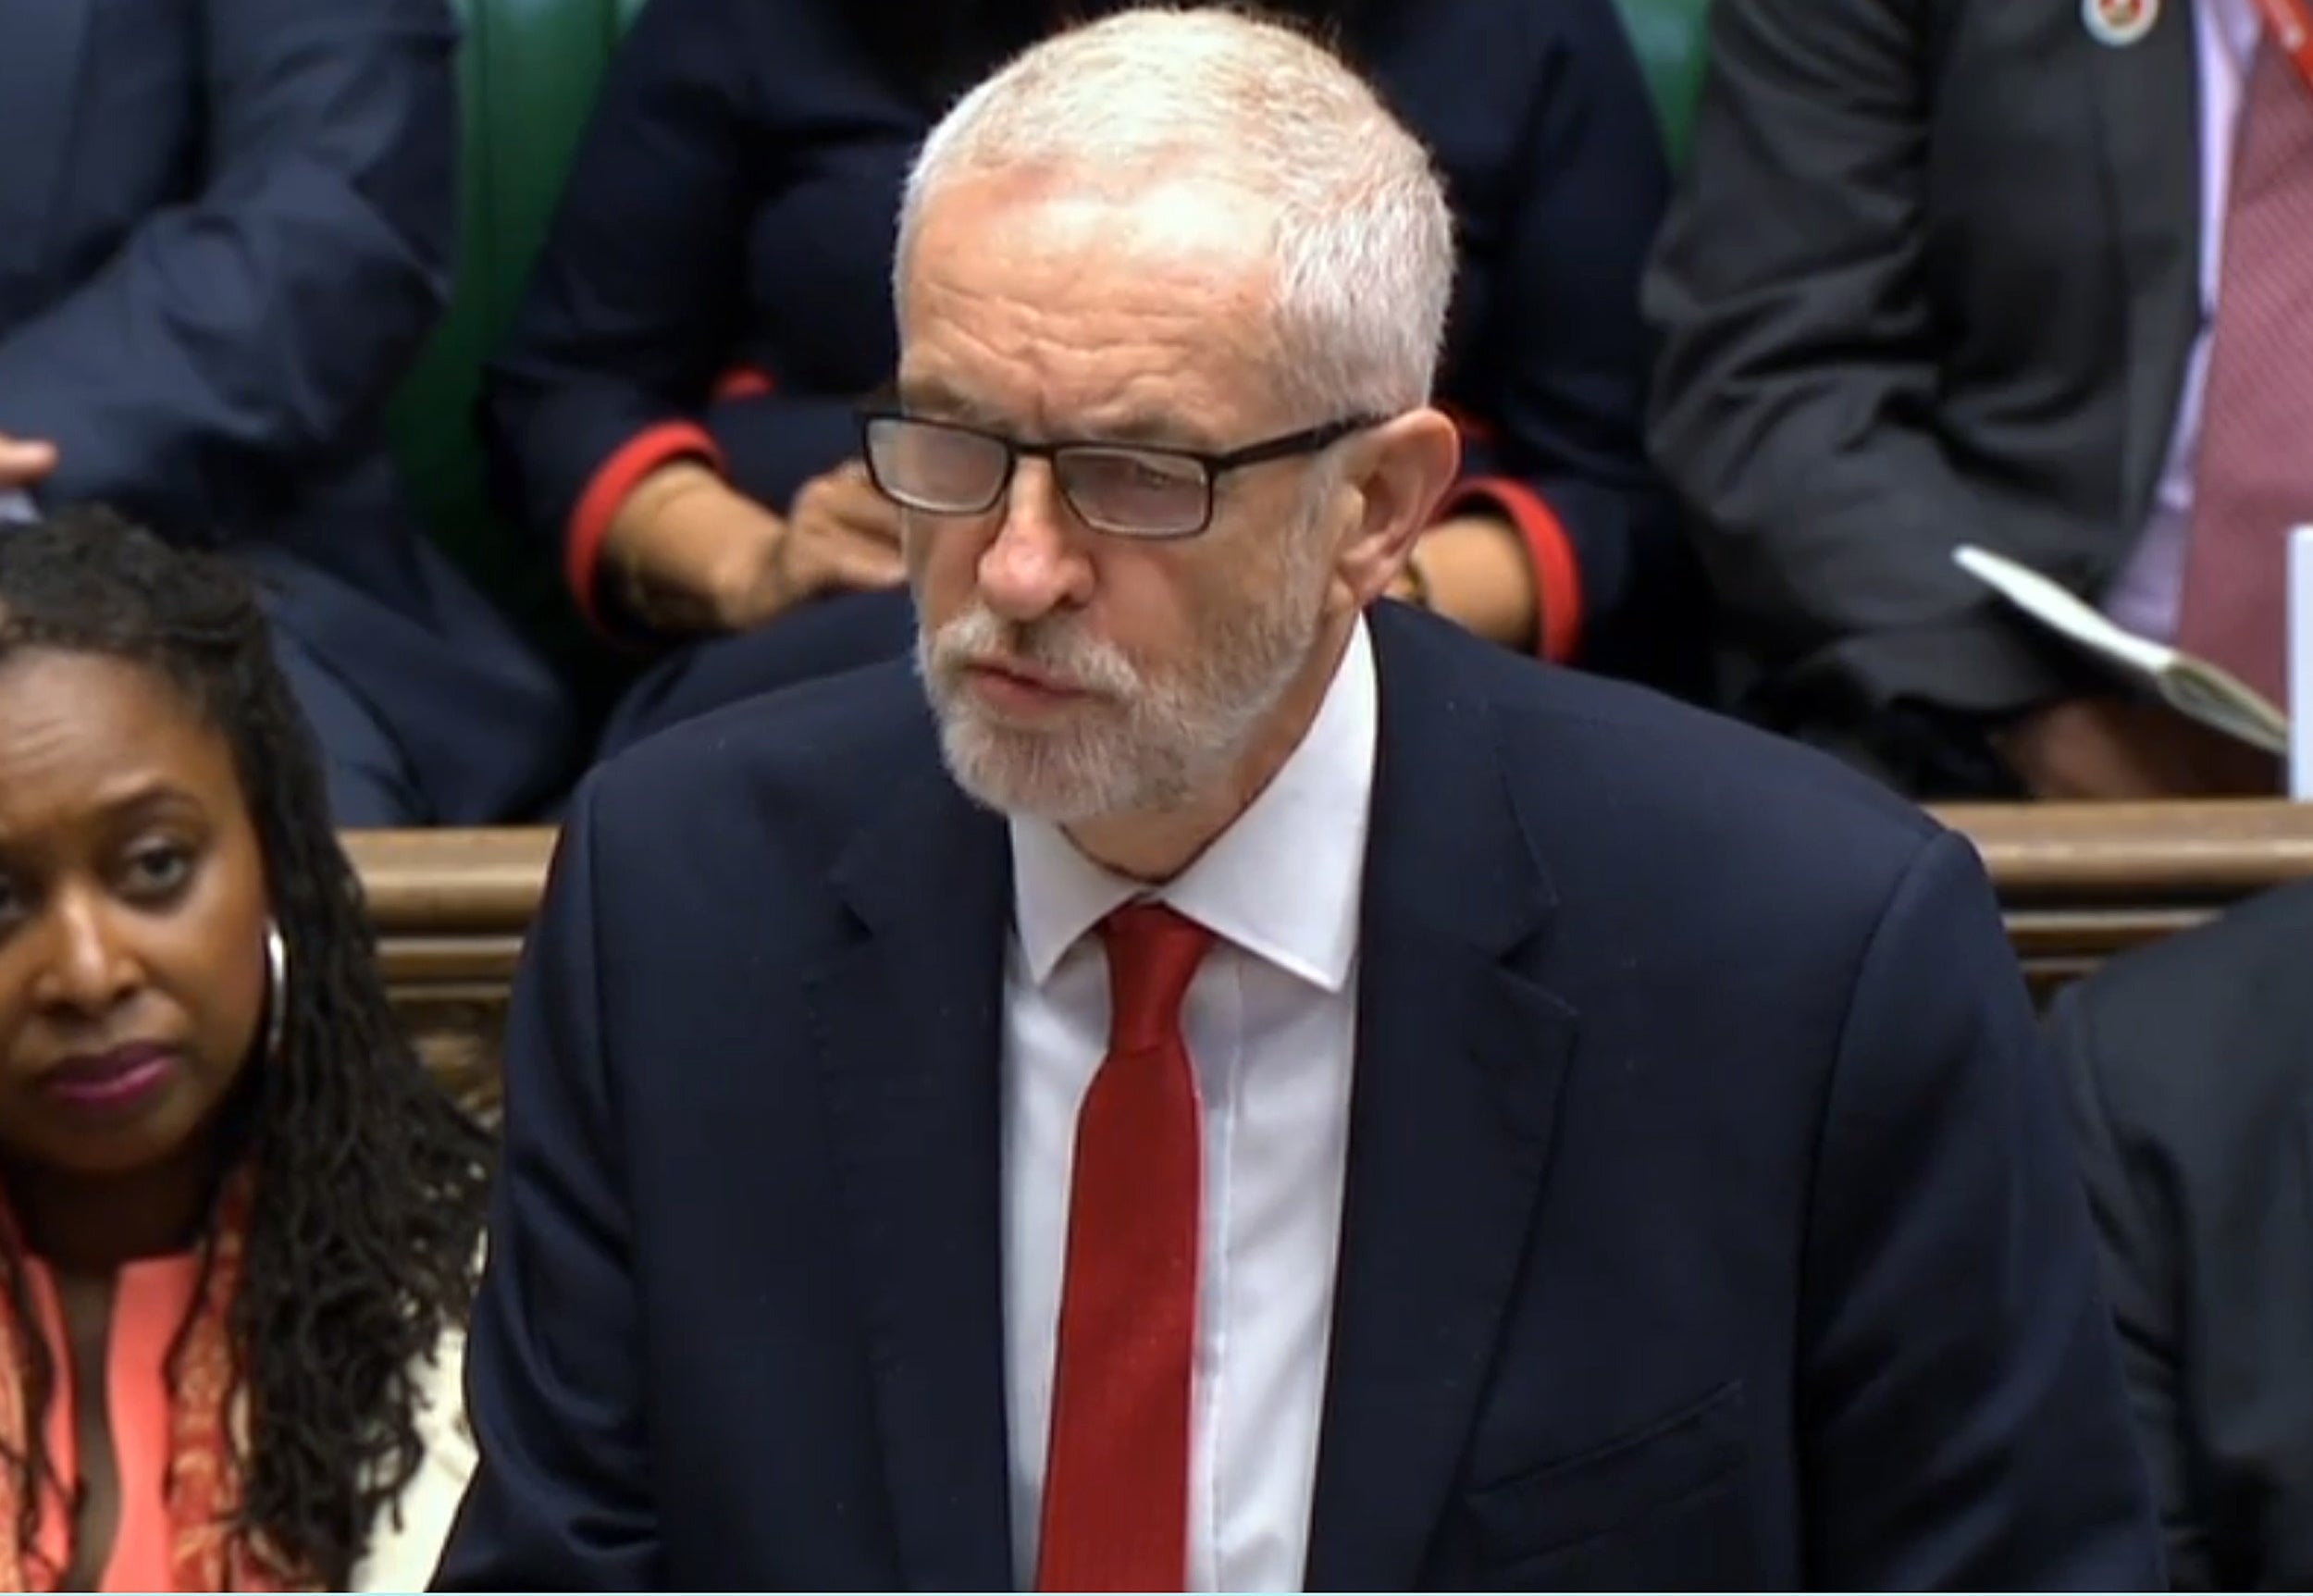 Jeremy Corbyn accuses Boris Johnson of breaking his promise by still being alive